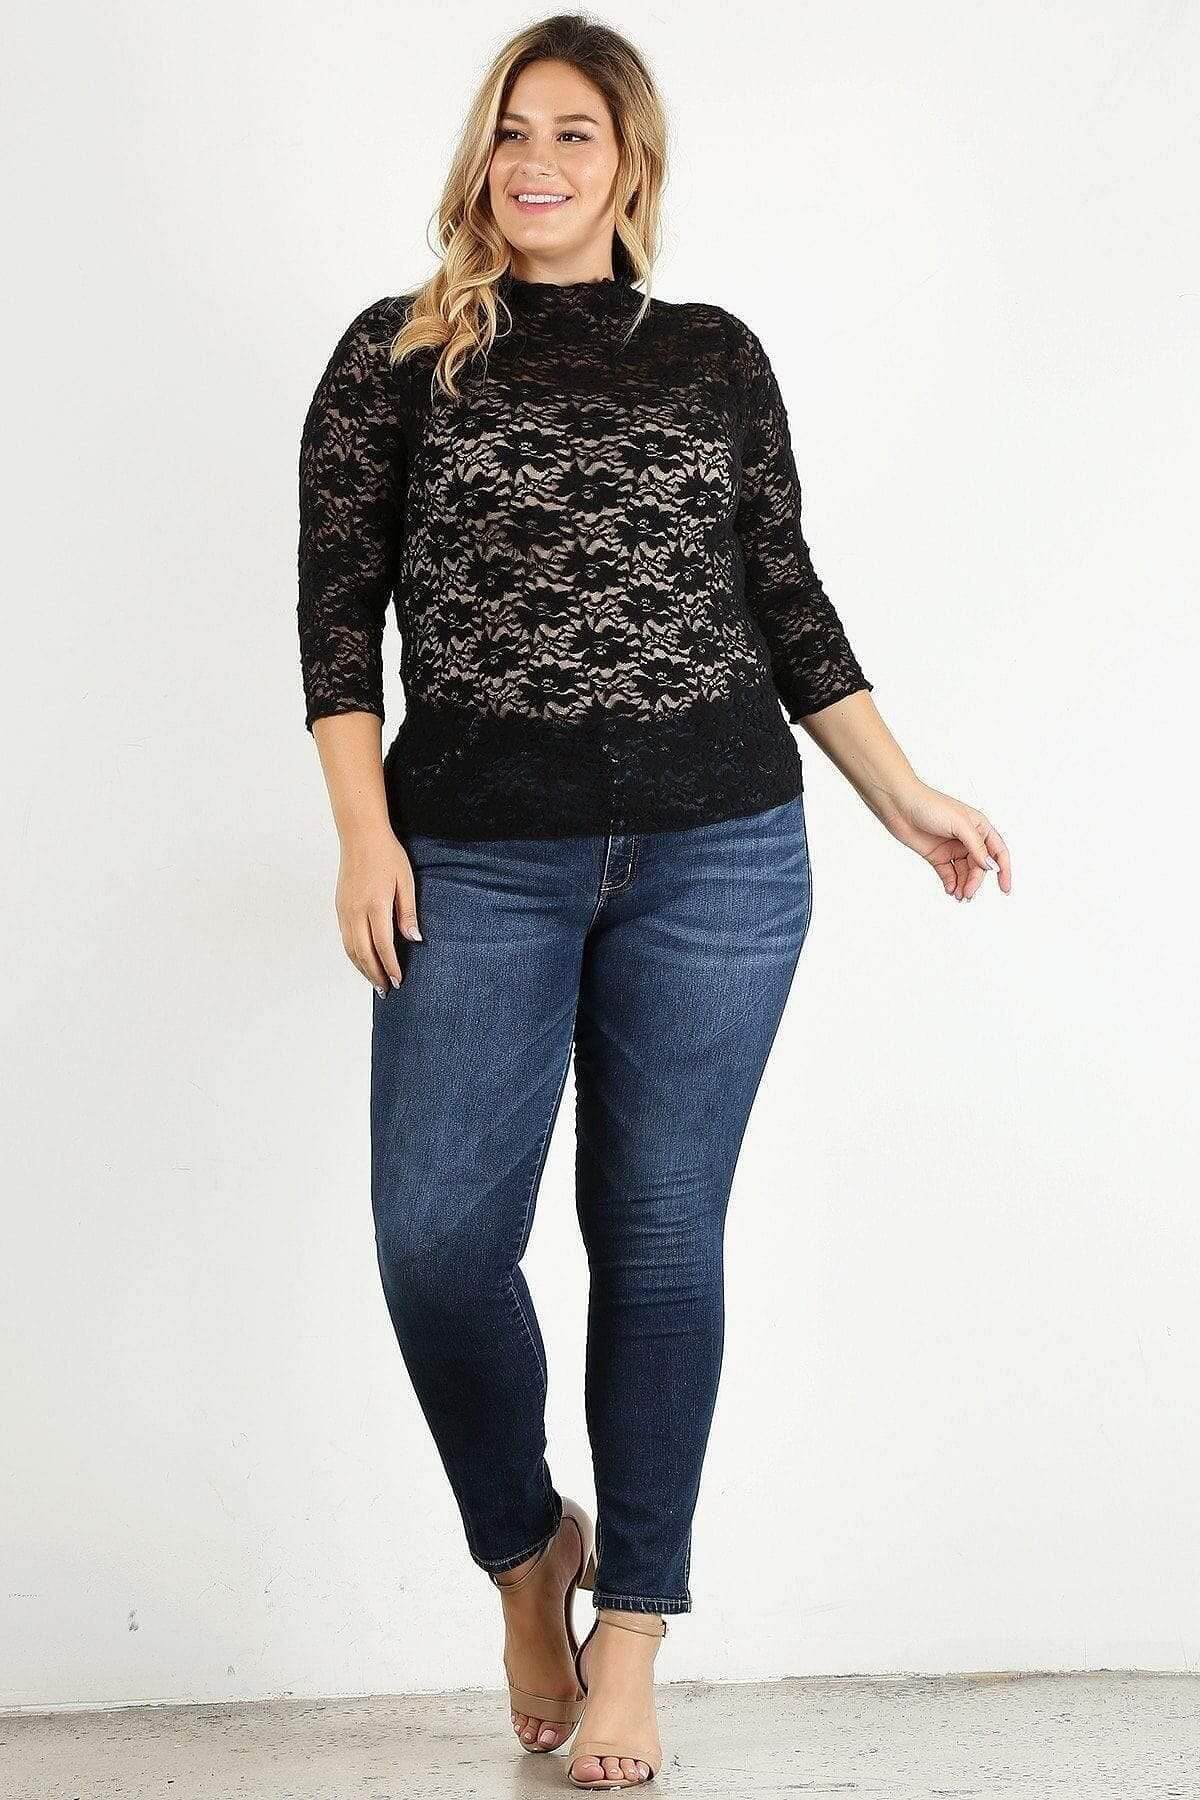 Black Plus Size Midi Sleeve Lace Top - Shopping Therapy, LLC plus size tops